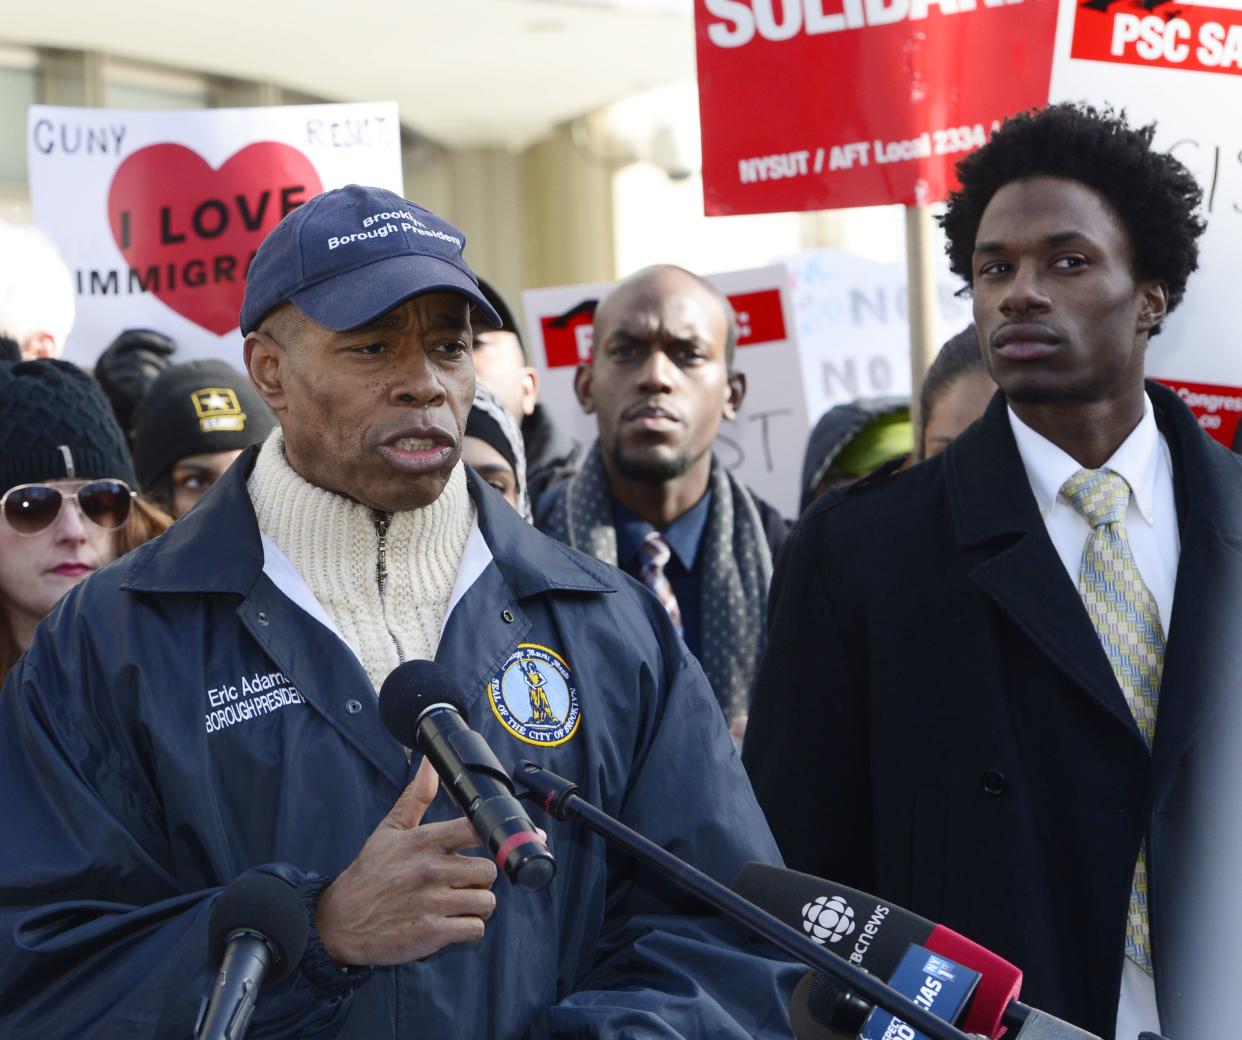 Then-Brooklyn borough president Eric Adams (left) and Hercules Reid (right) outside Federal Court in Brooklyn, New York on Jan. 30, 2017. 